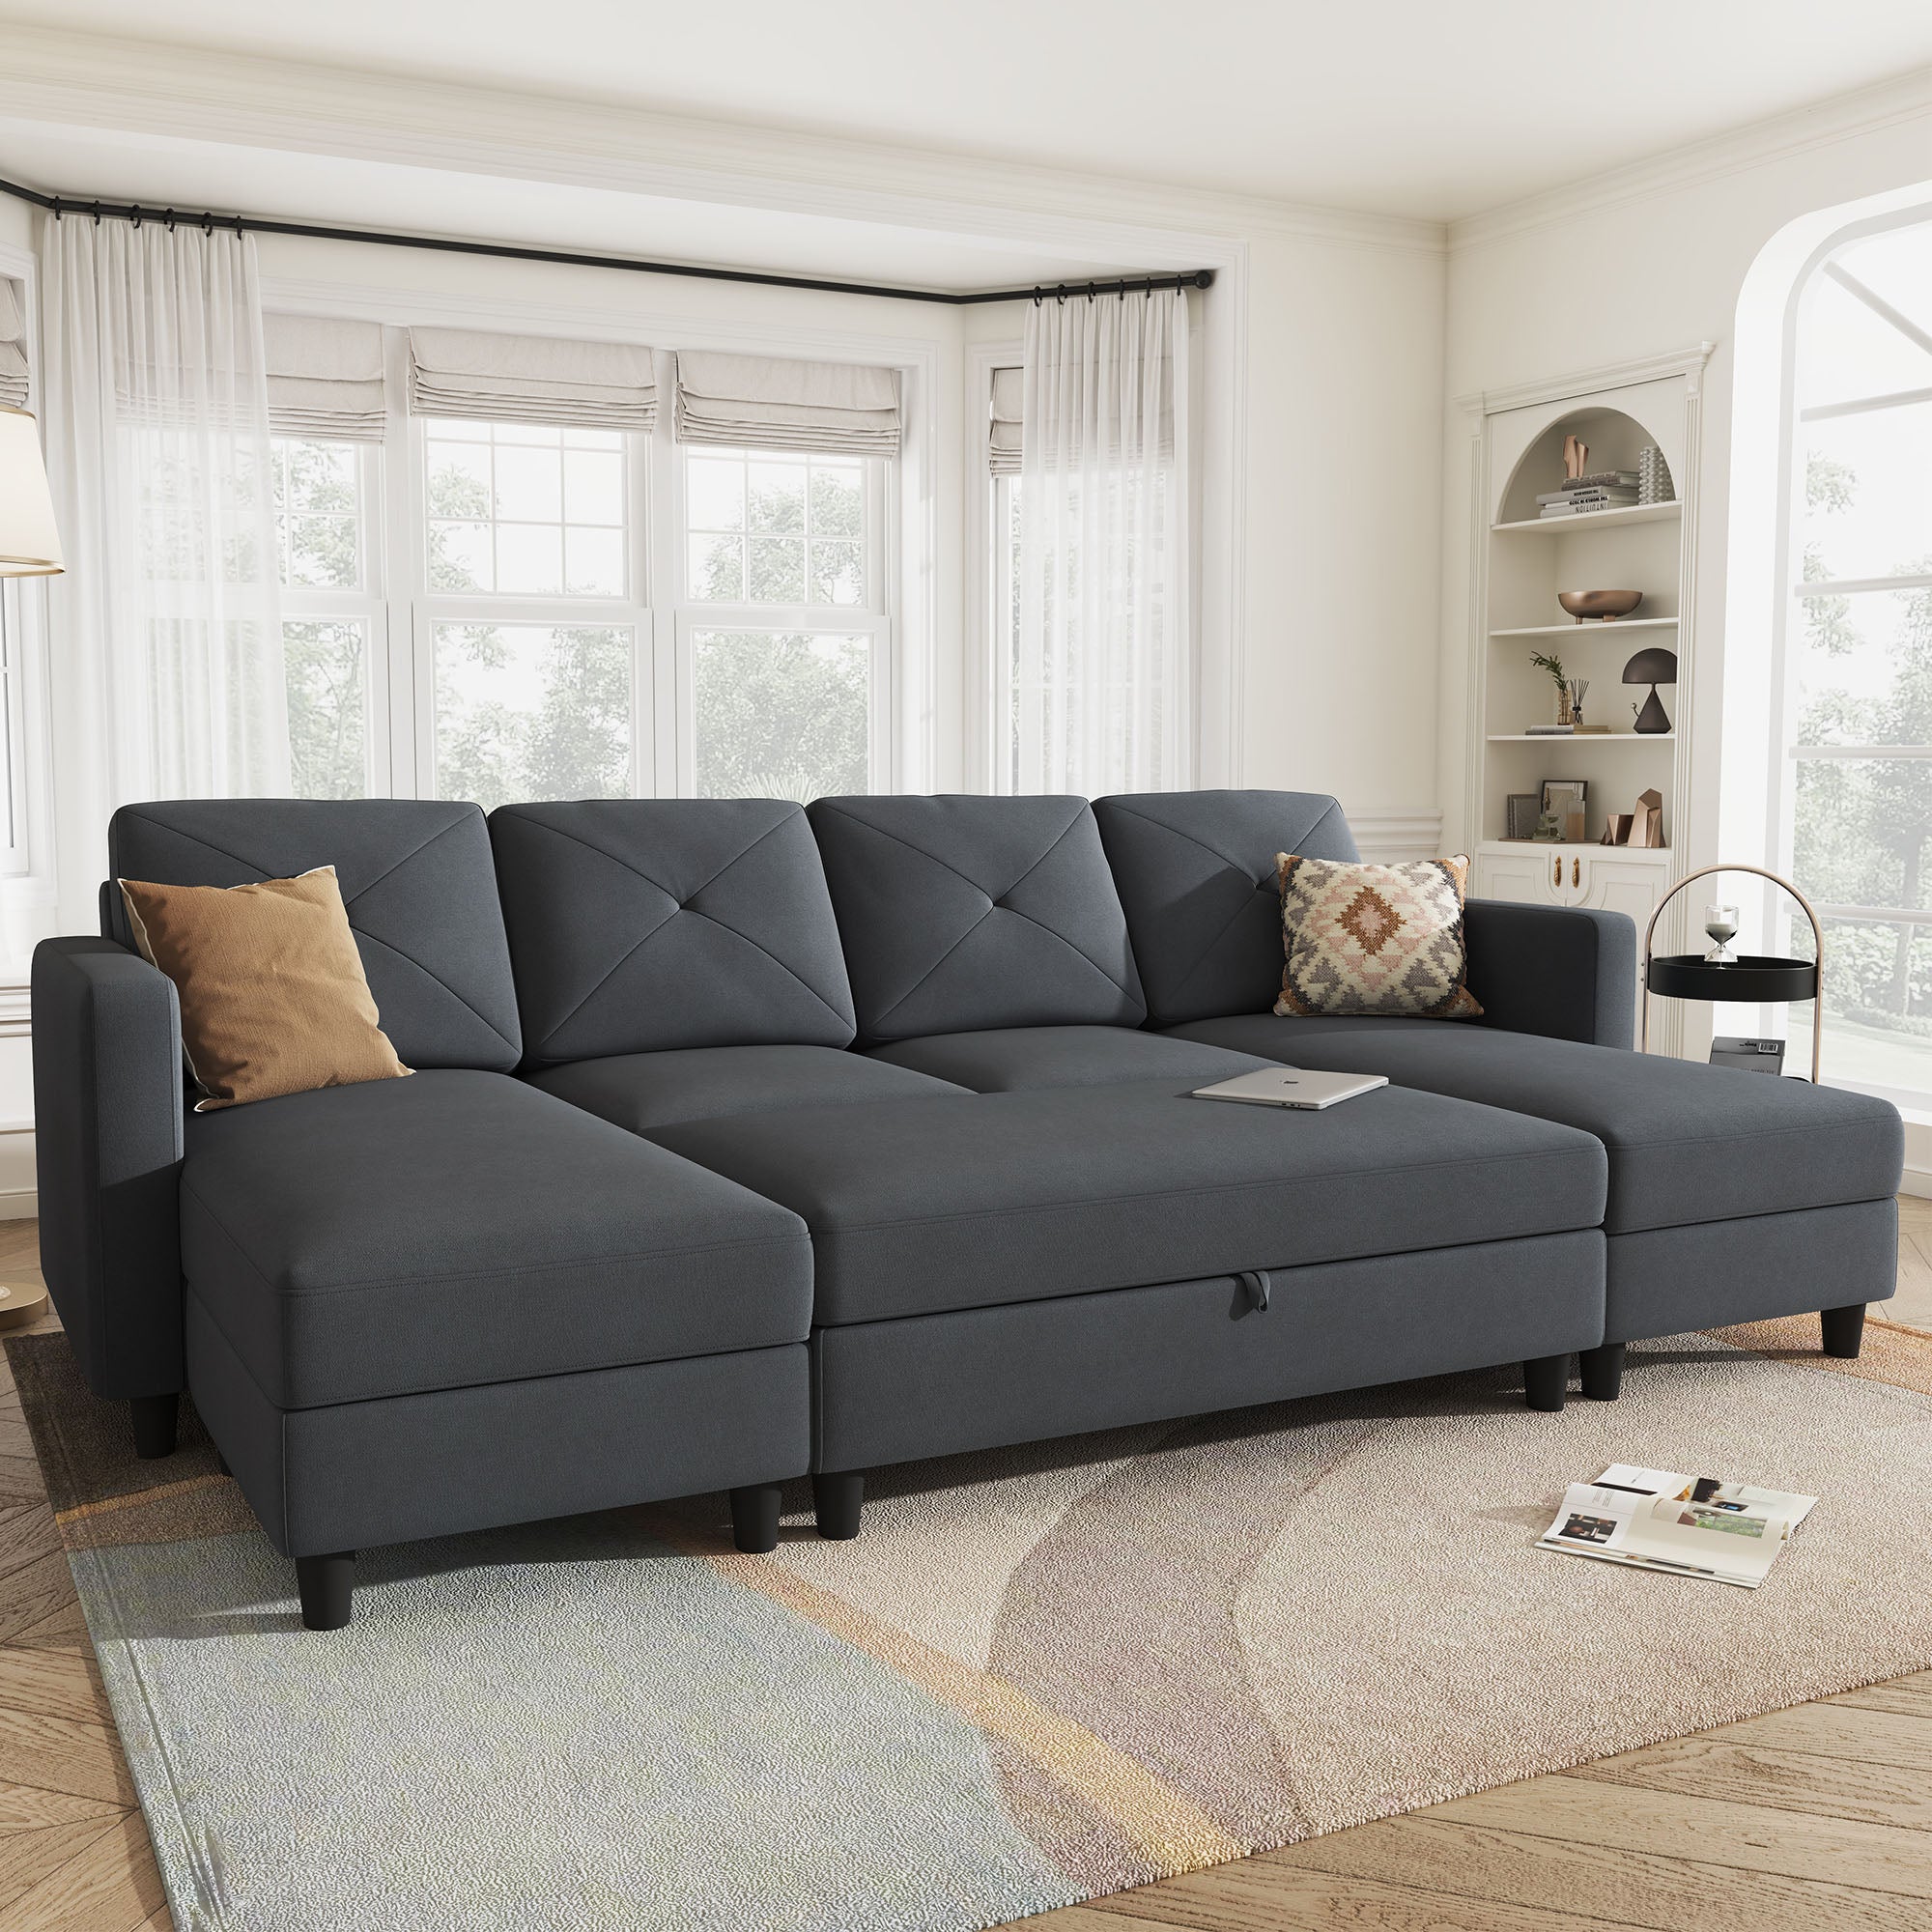 HONBAY Sleeper Sectional Sofa with Chaises U Shaped Couch with Storage Ottoman Sofa Bed for Living Room